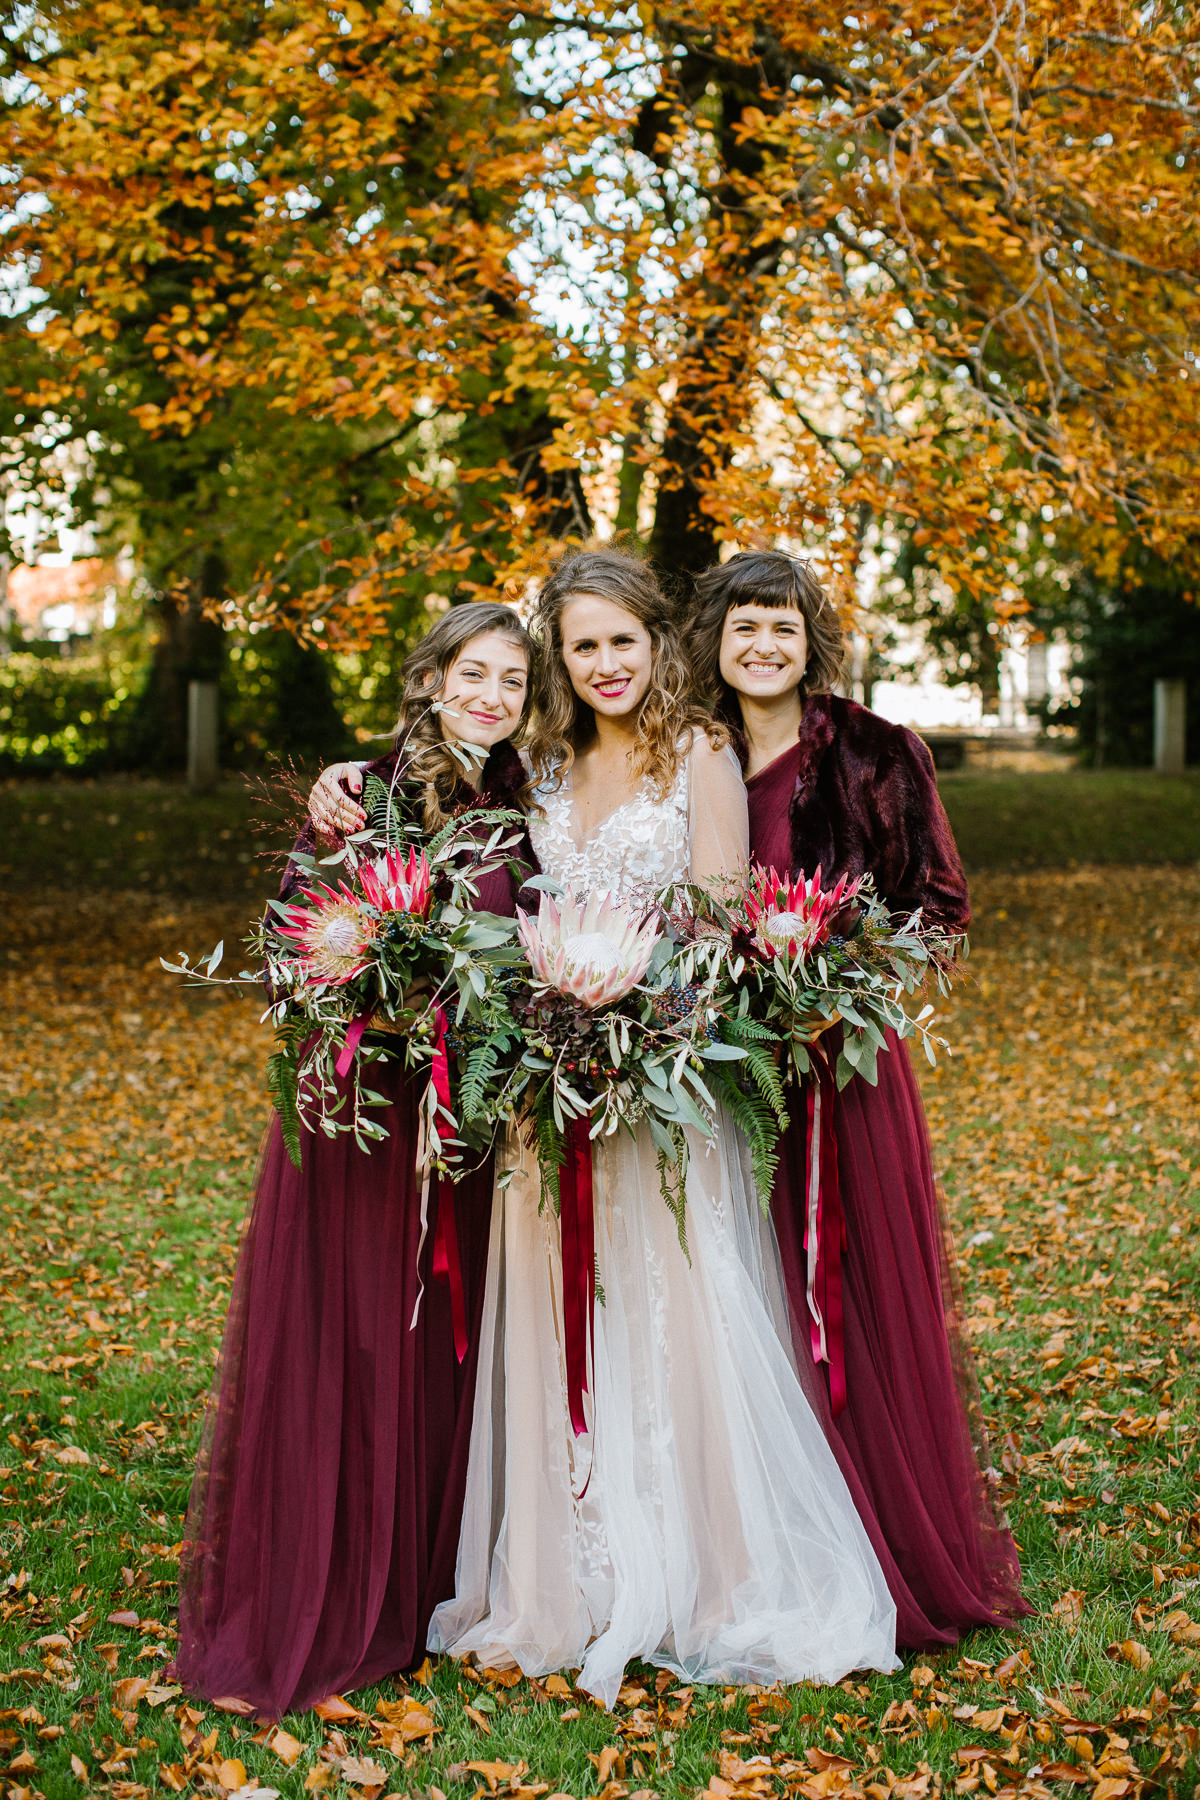 A Fabulous Fall Irish Wedding in Red and Gold